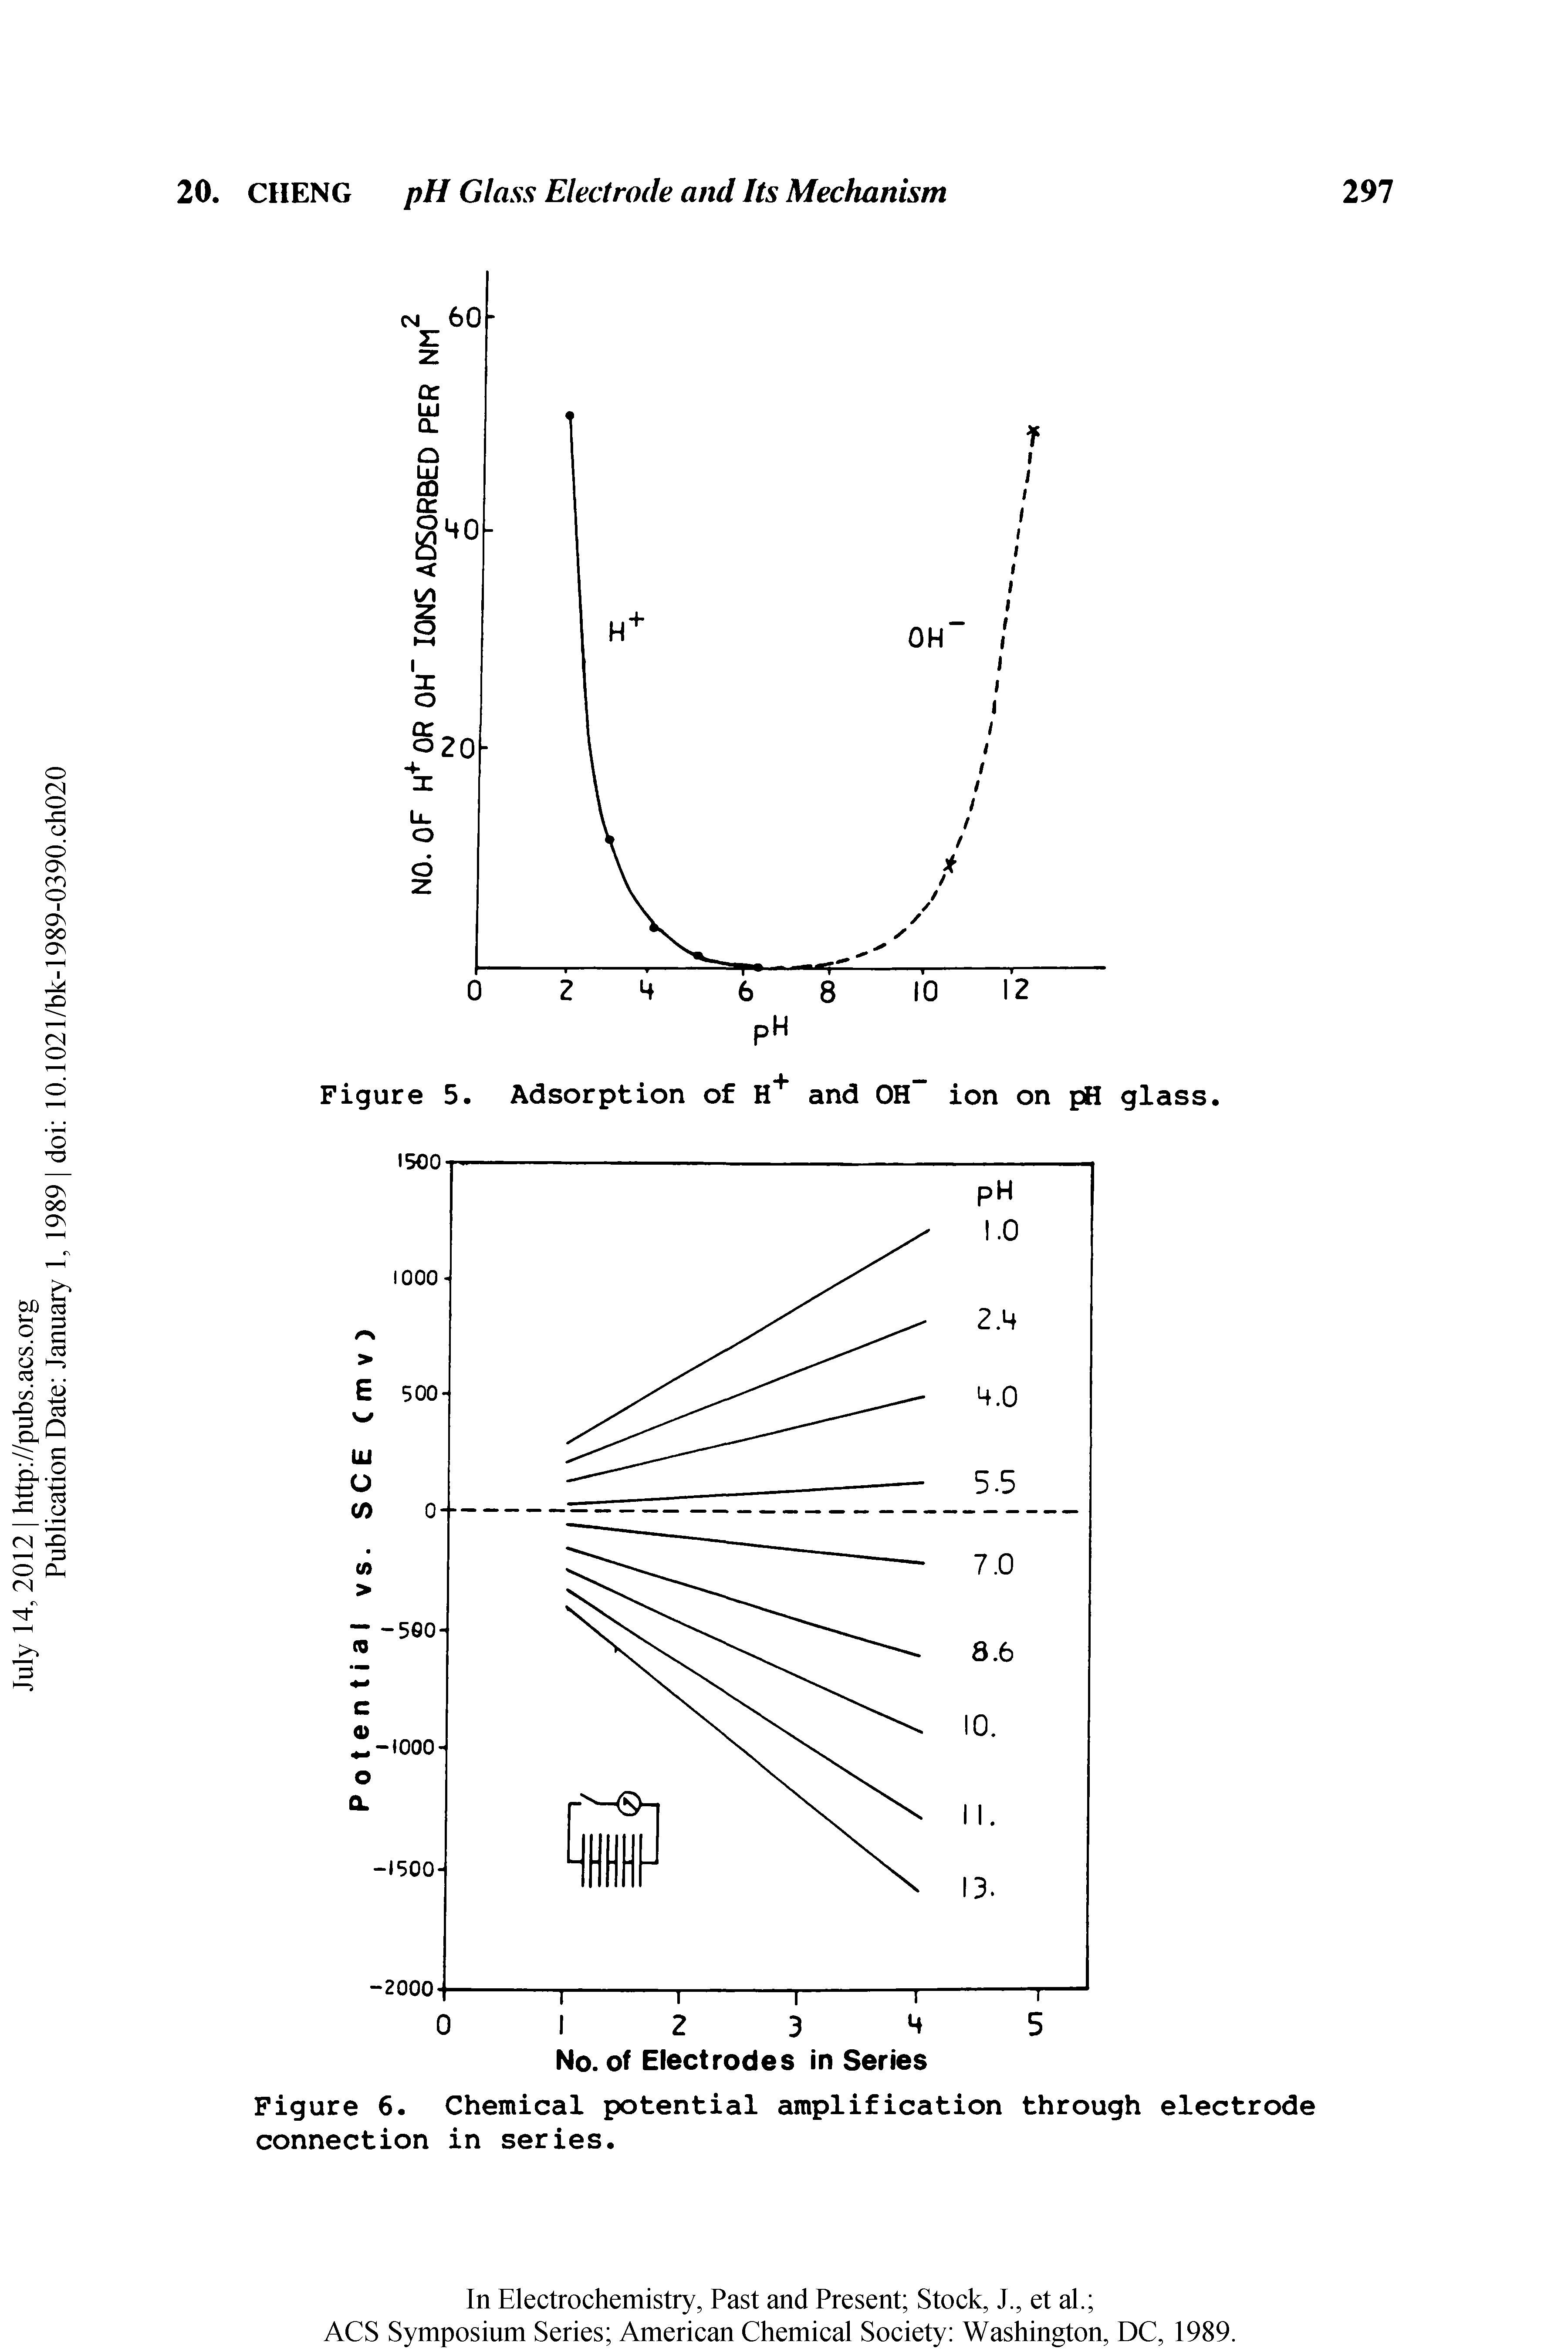 Figure 6. Chemical potential amplification through electrode connection in series.